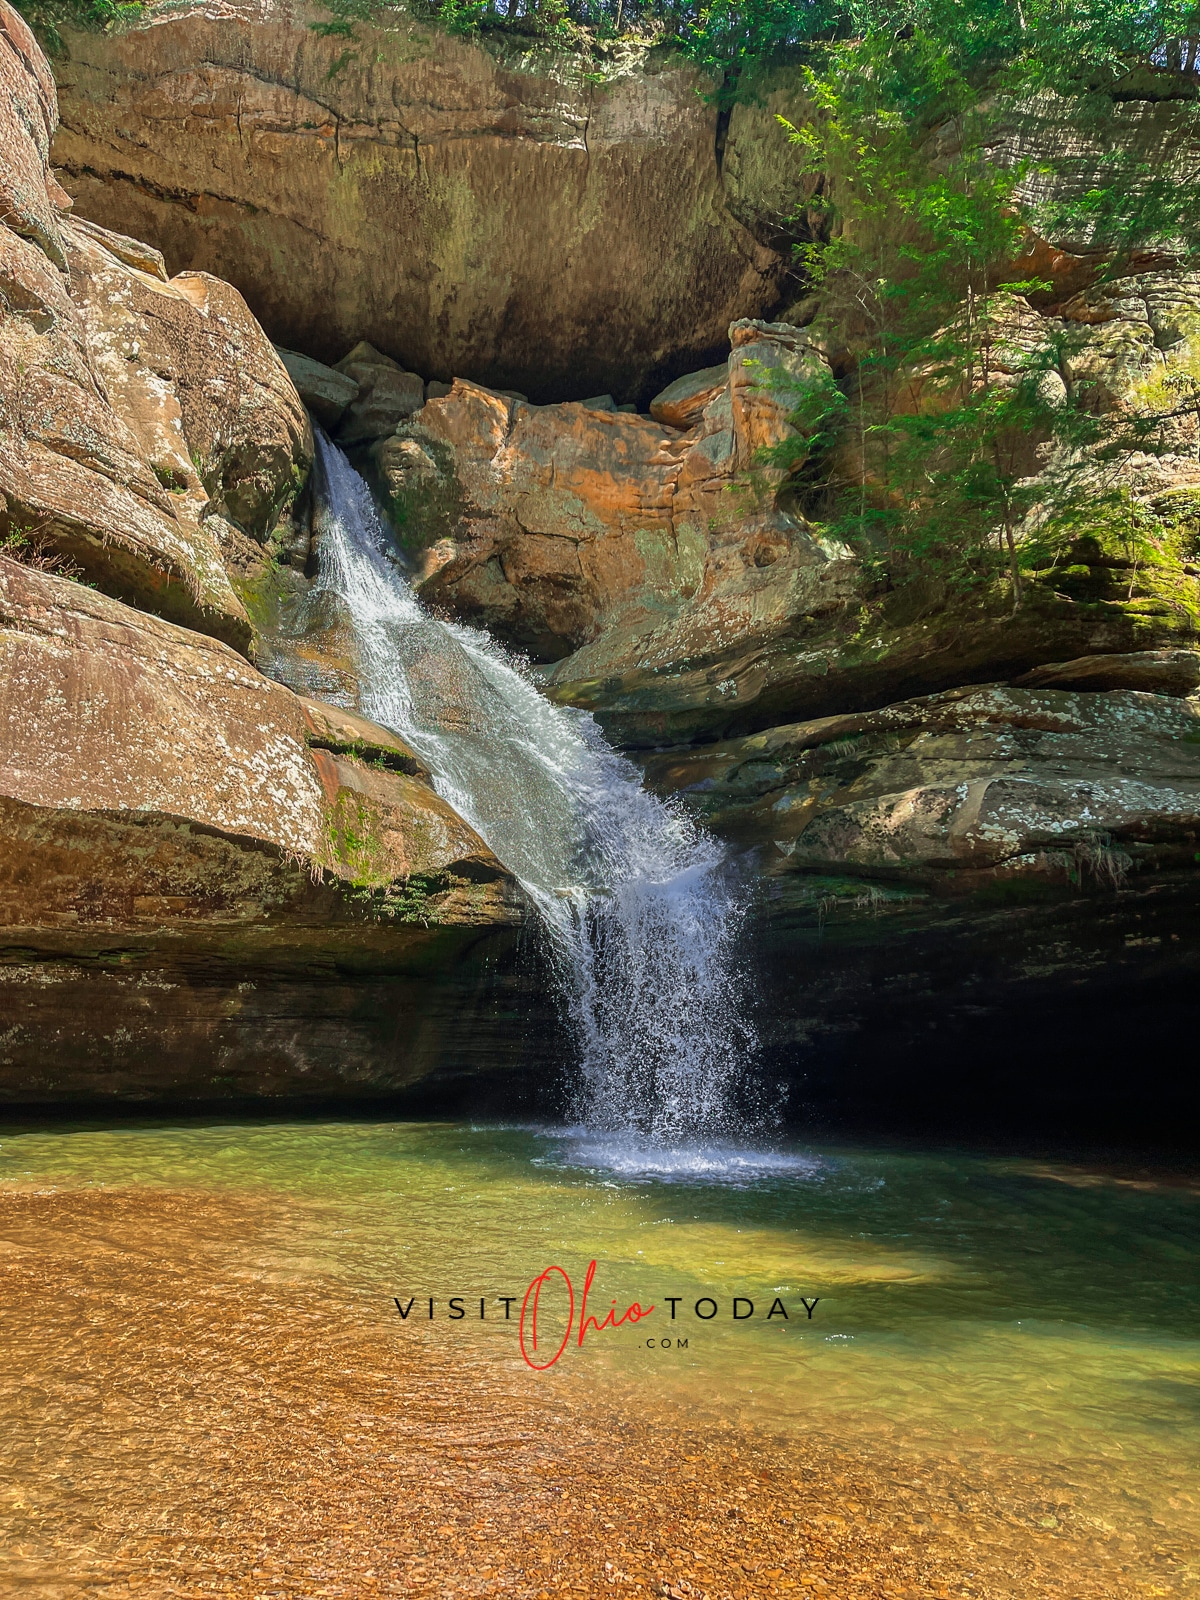 unobstructed view of cedar falls waterfall, water flowing down rocks into a clear pool Photo credit: Cindy Gordon of VisitOhioToday.com